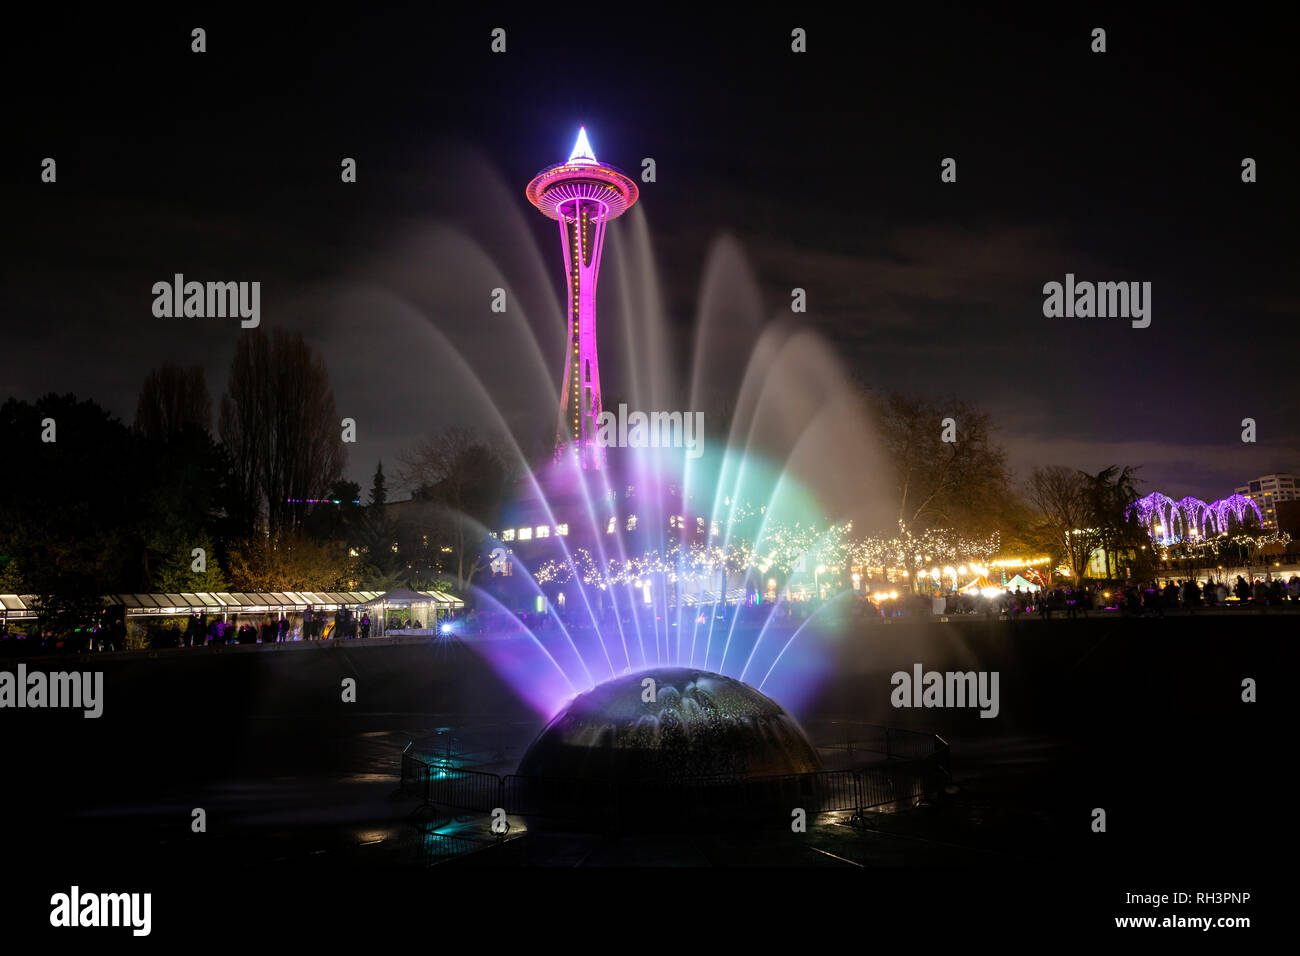 WA17060-00...WASHINGTON - The Space Needle and the International Fountain in the Seattle Center. Stock Photo